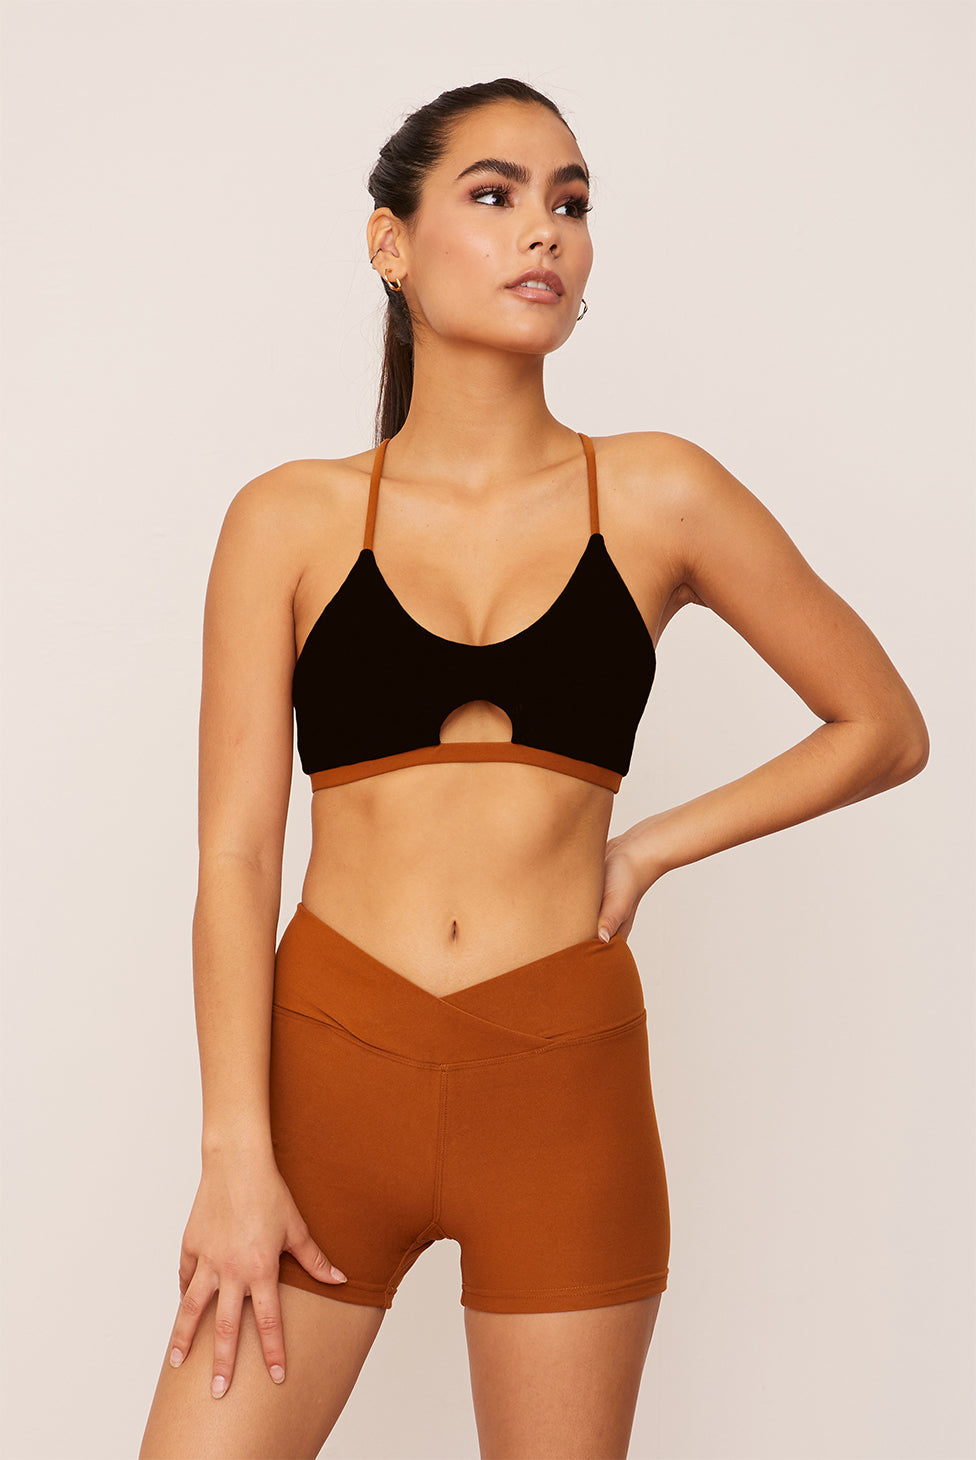 The Turmeric Crisscross Bra provides the support you need without